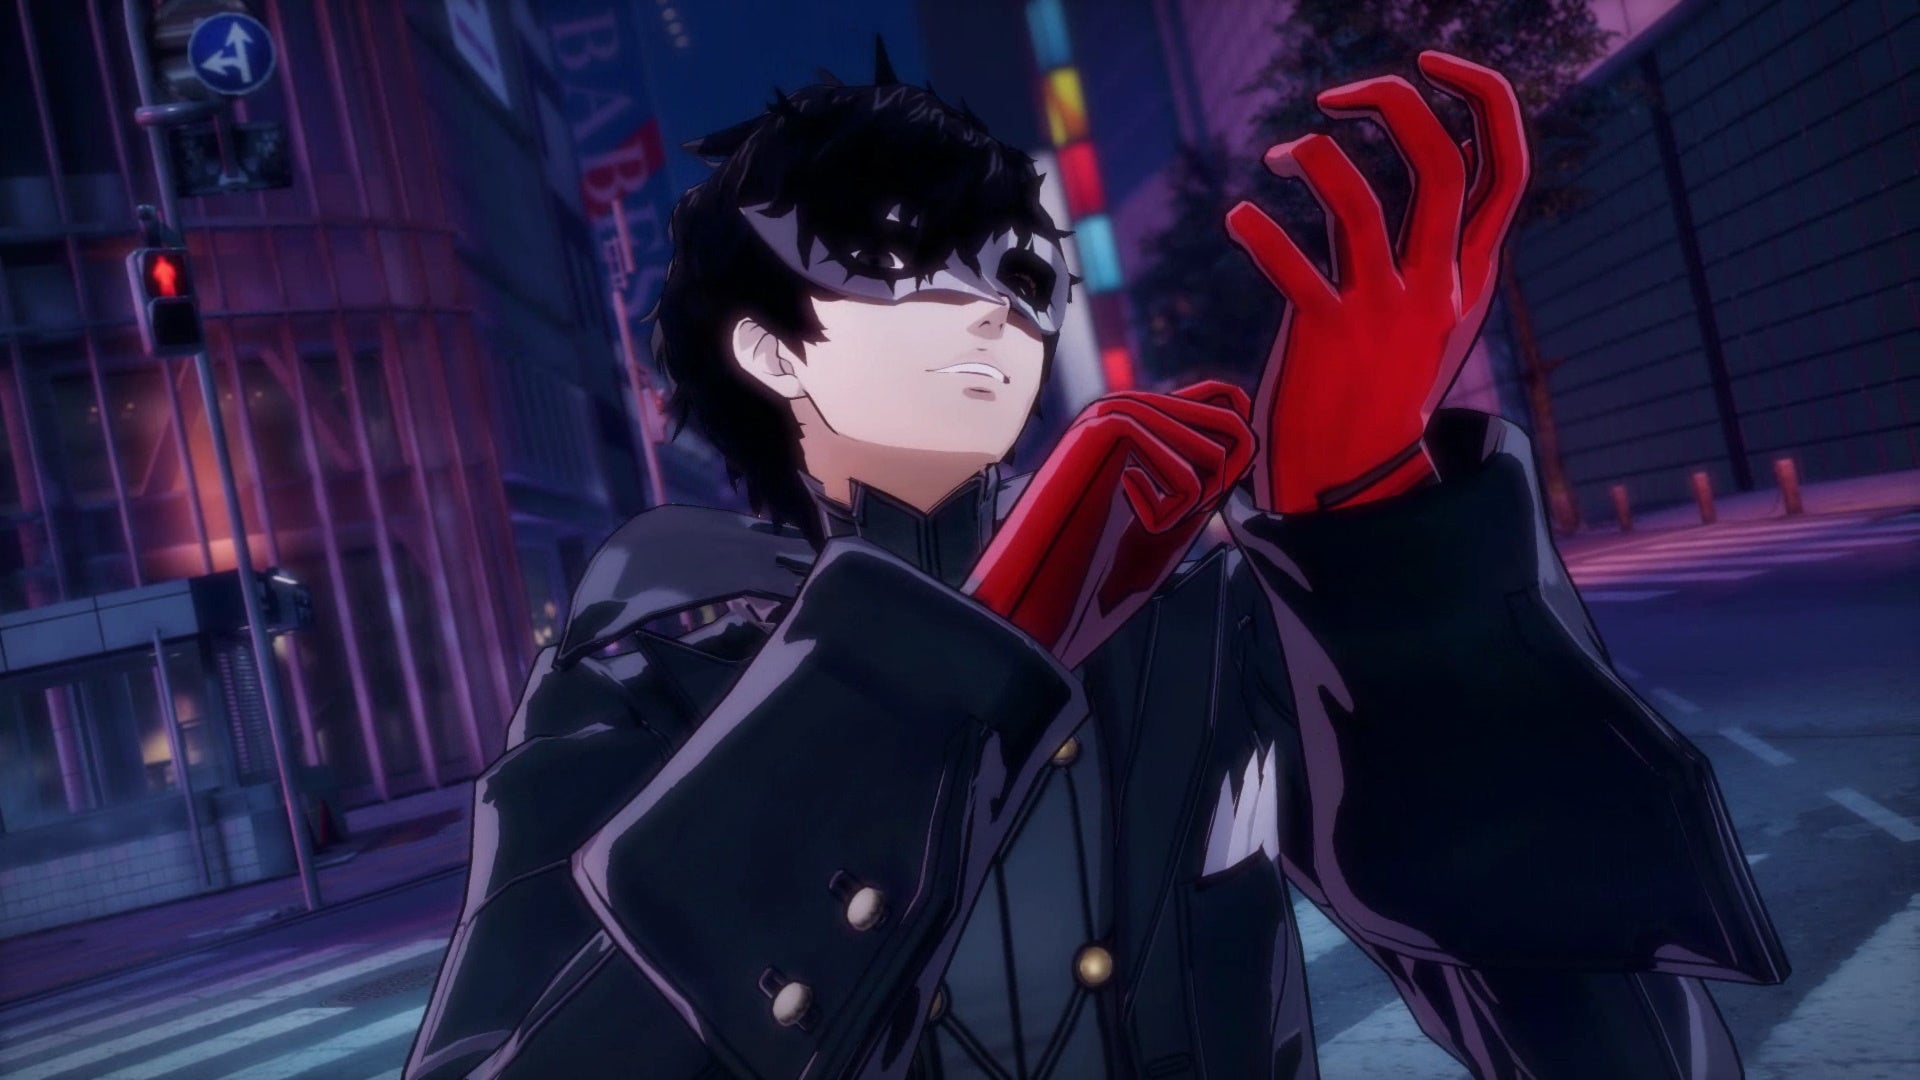 Joker adjusts his gloves before infiltrating the Shibuya jail in Persona 5 Strikers.